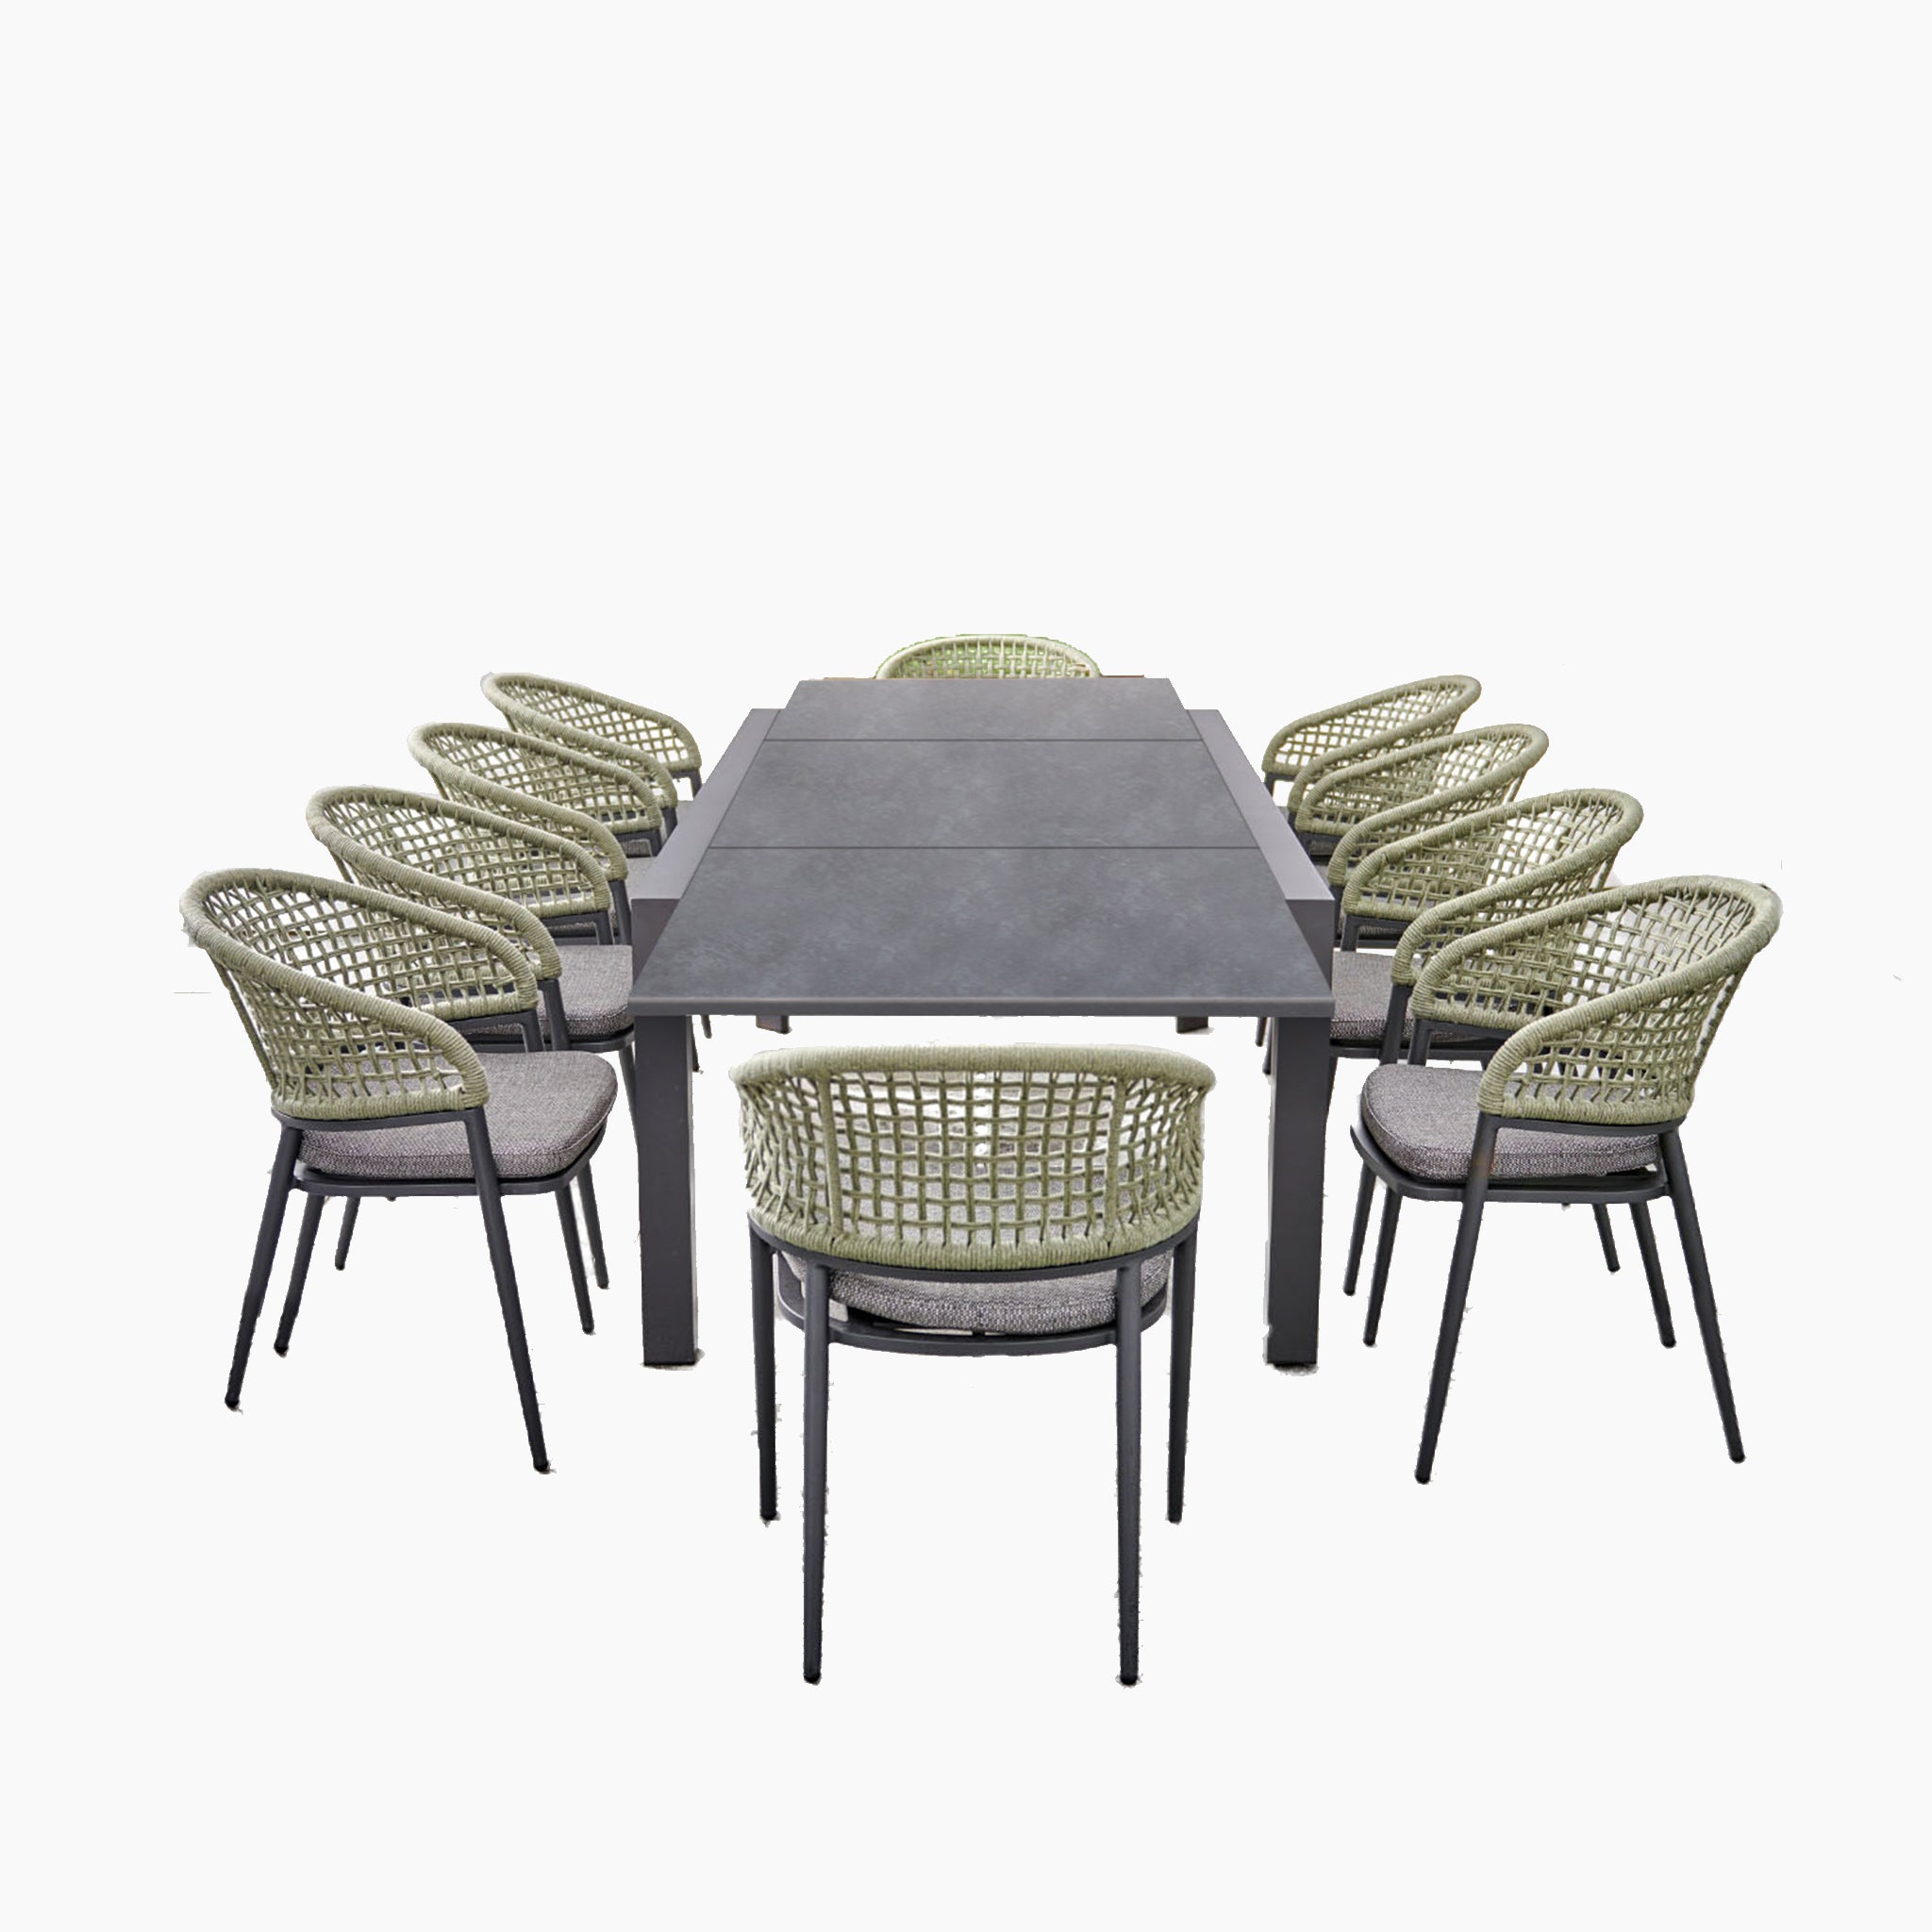 Kalama 10 Seat Rectangular Extending Dining Set with Ceramic Table in Olive Green